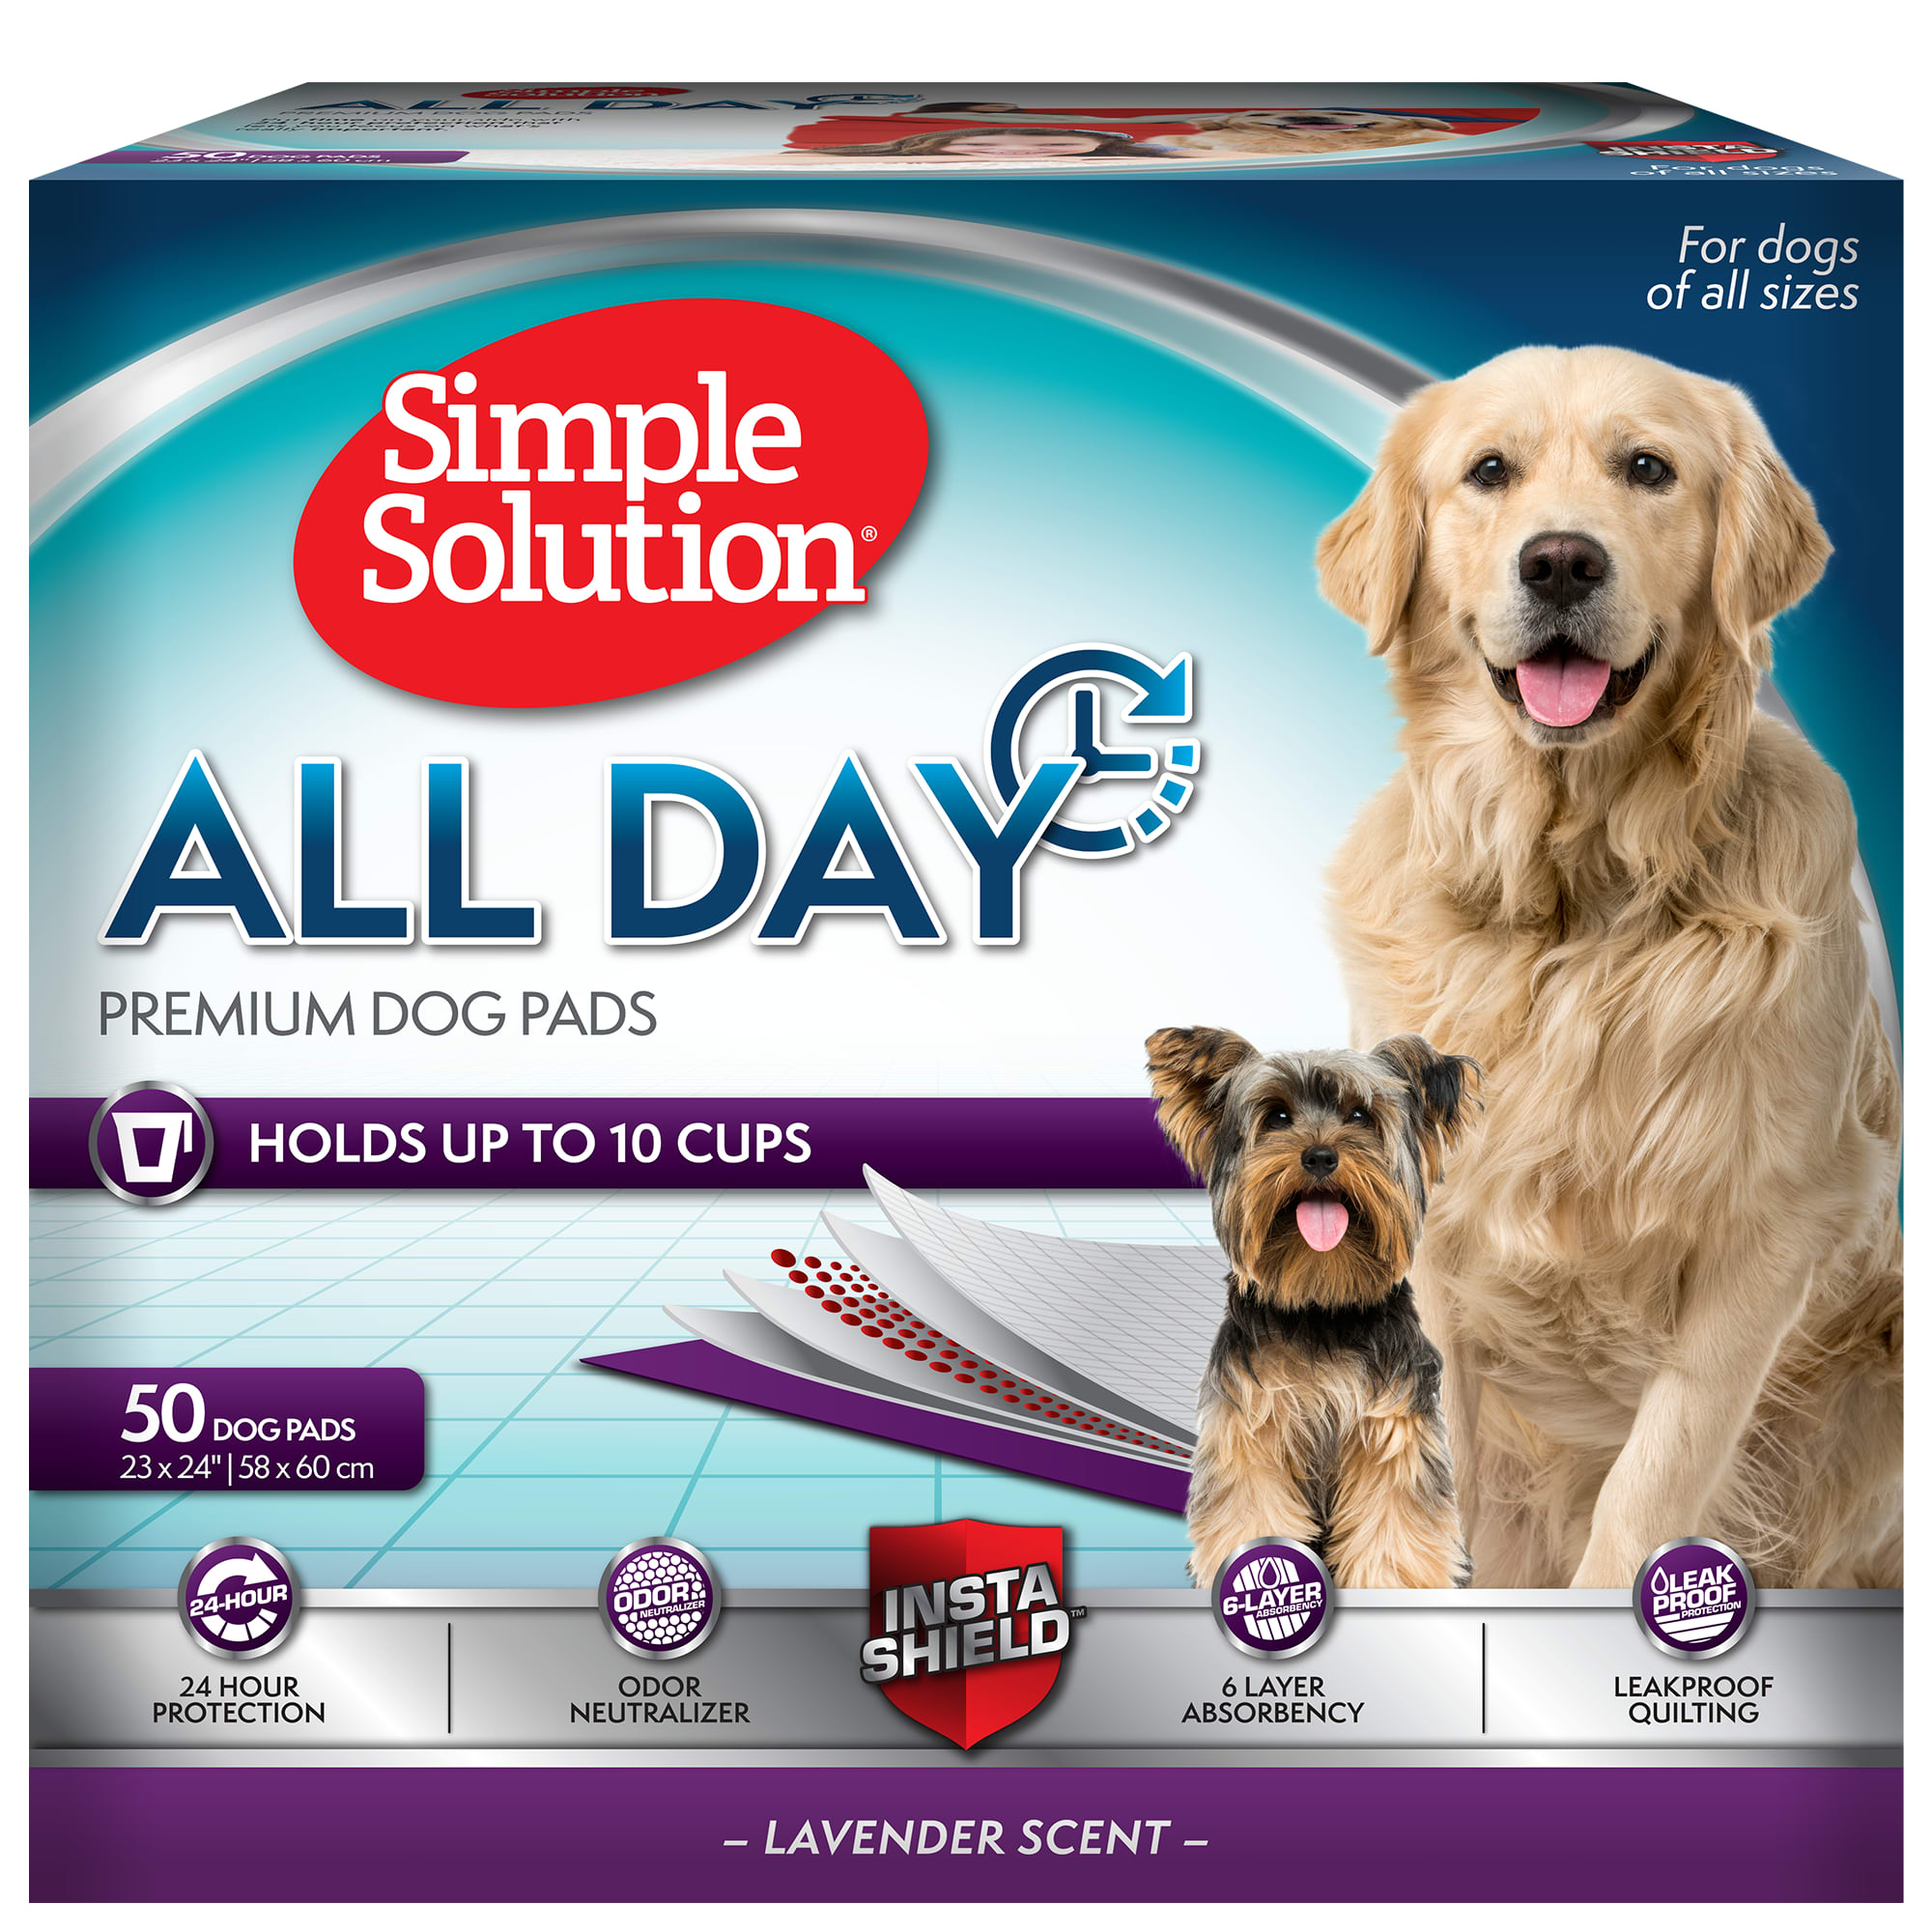 Simple Solution 6-Layer All Day Premium Dog Pads, 23 x 24, Lavender Scent, 50 pads